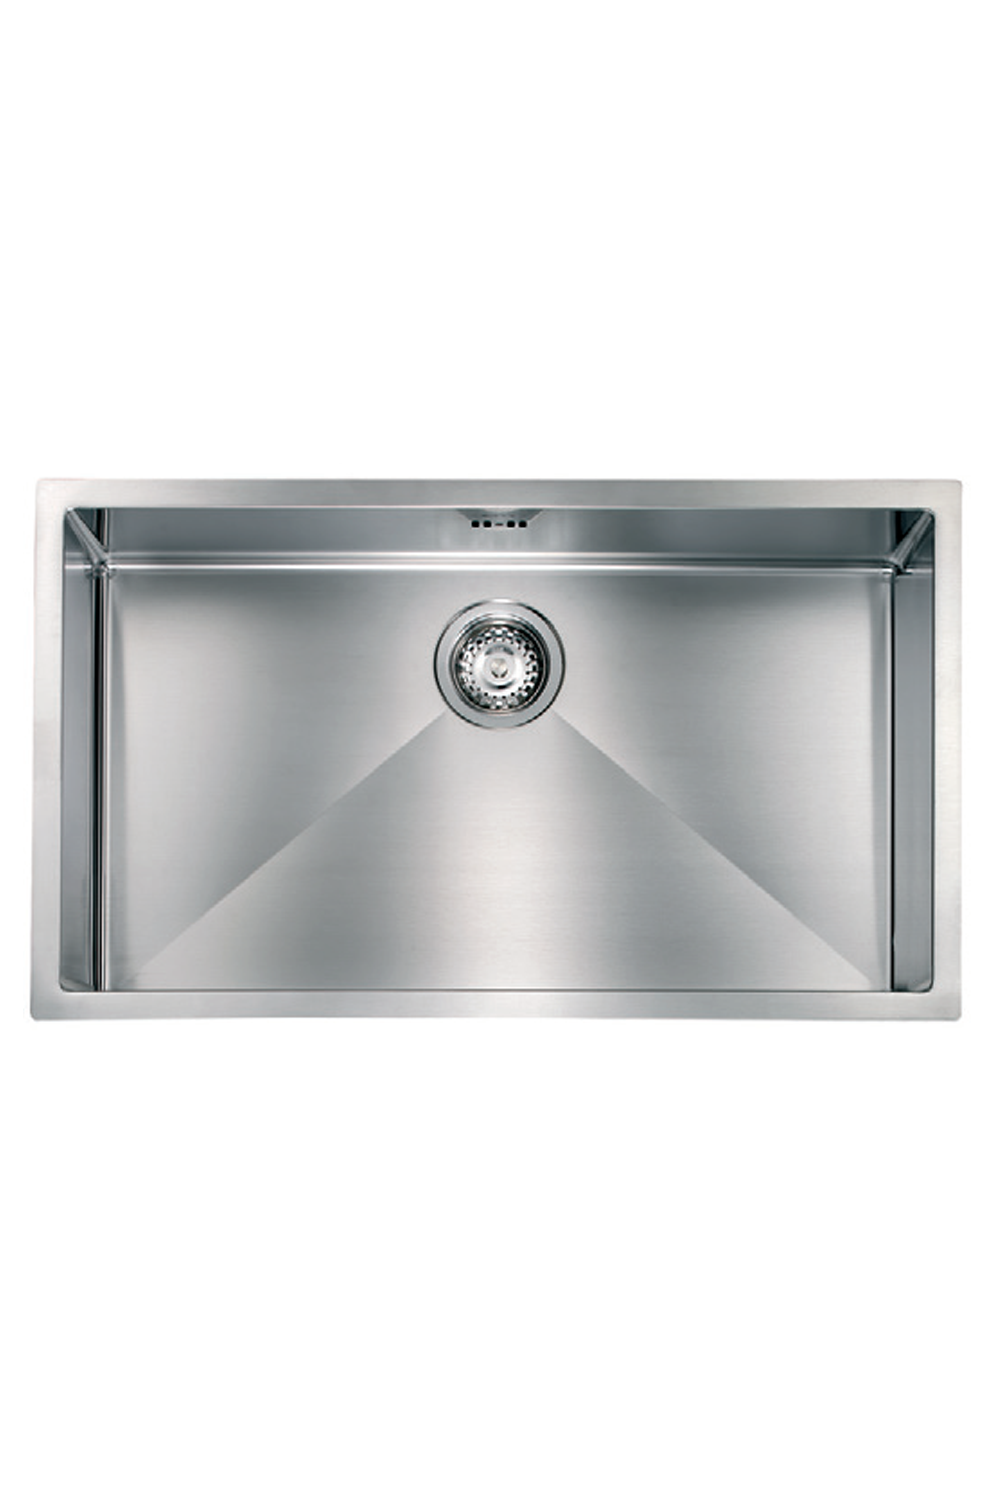 LUISINA 720mm R10-Corner Square Stainless Steel Sink | Made in Italy |